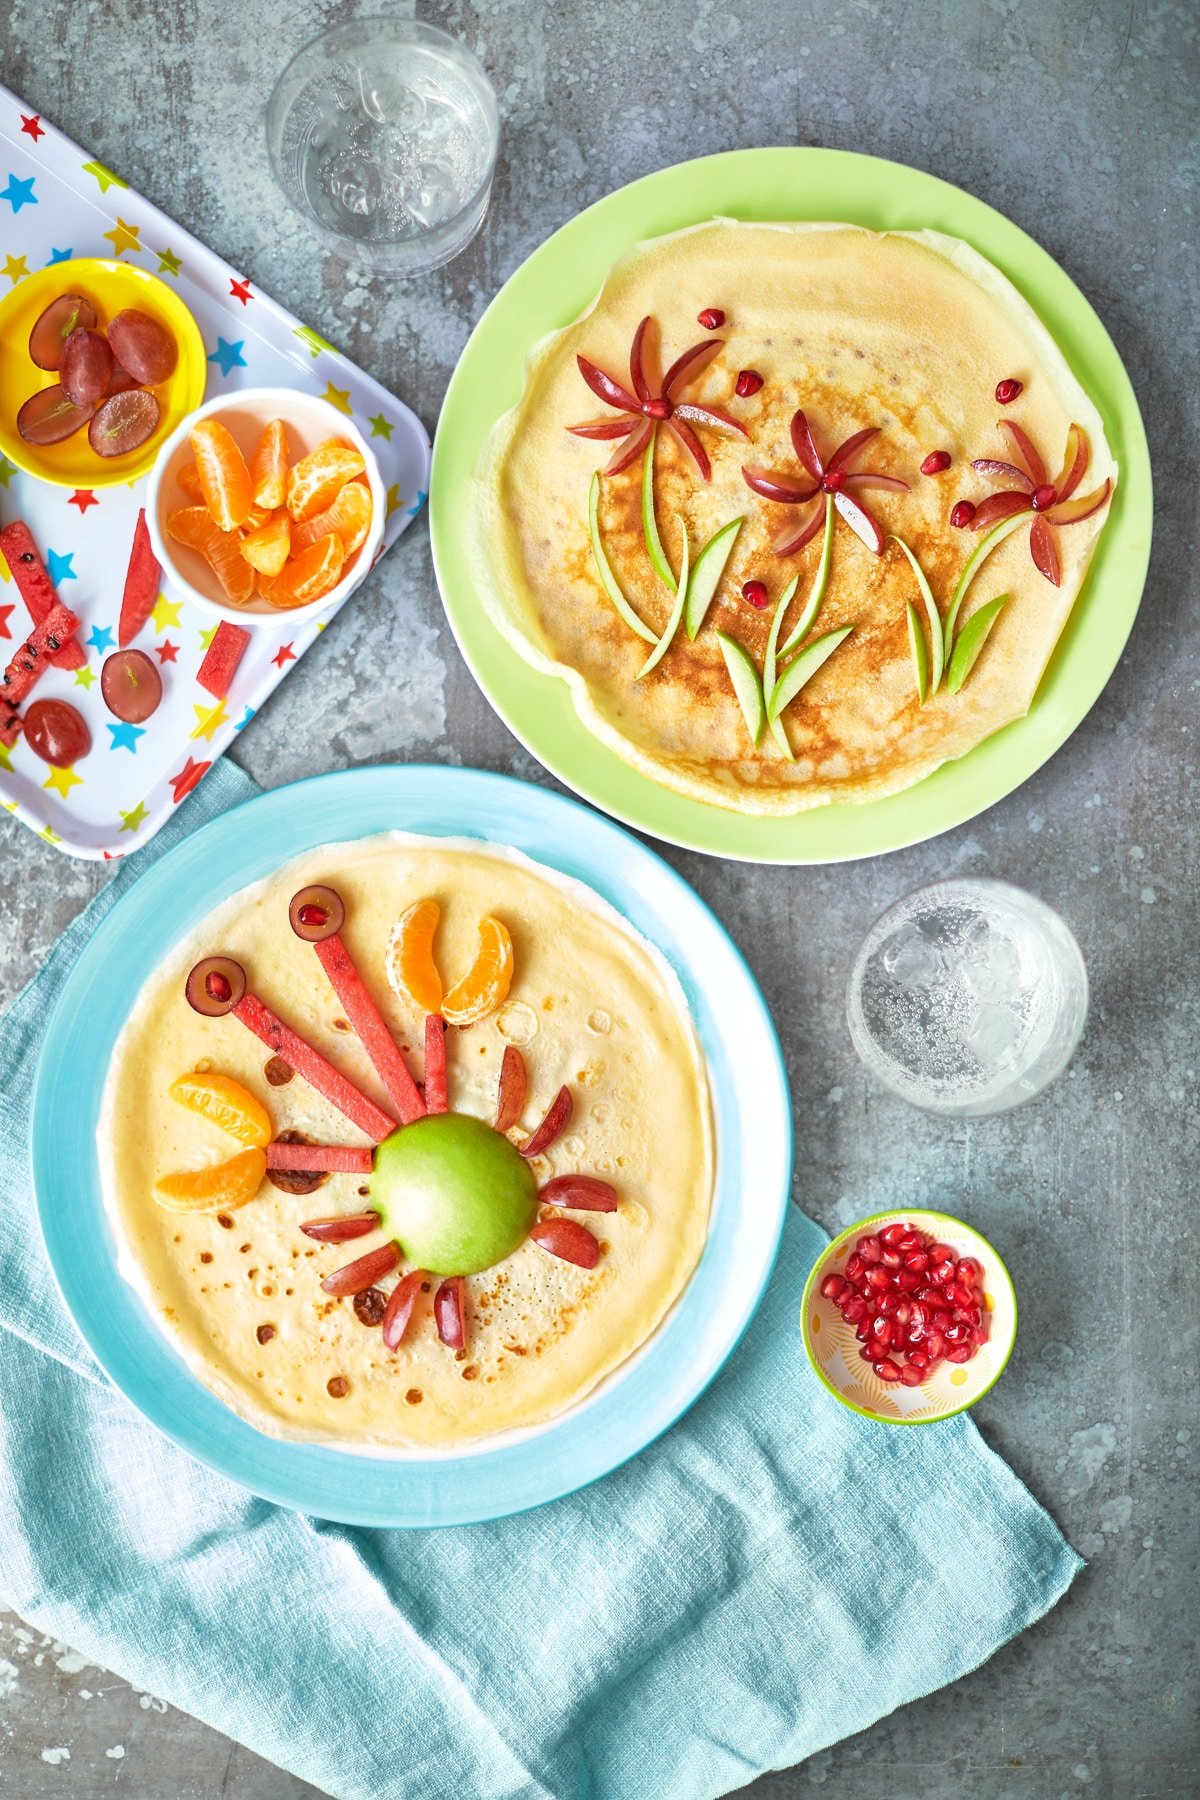 Two crepe-style pancakes on coloured plates. Both pancakes are decorated with fruit, one to resemble a crab and the other to resemble flowers.